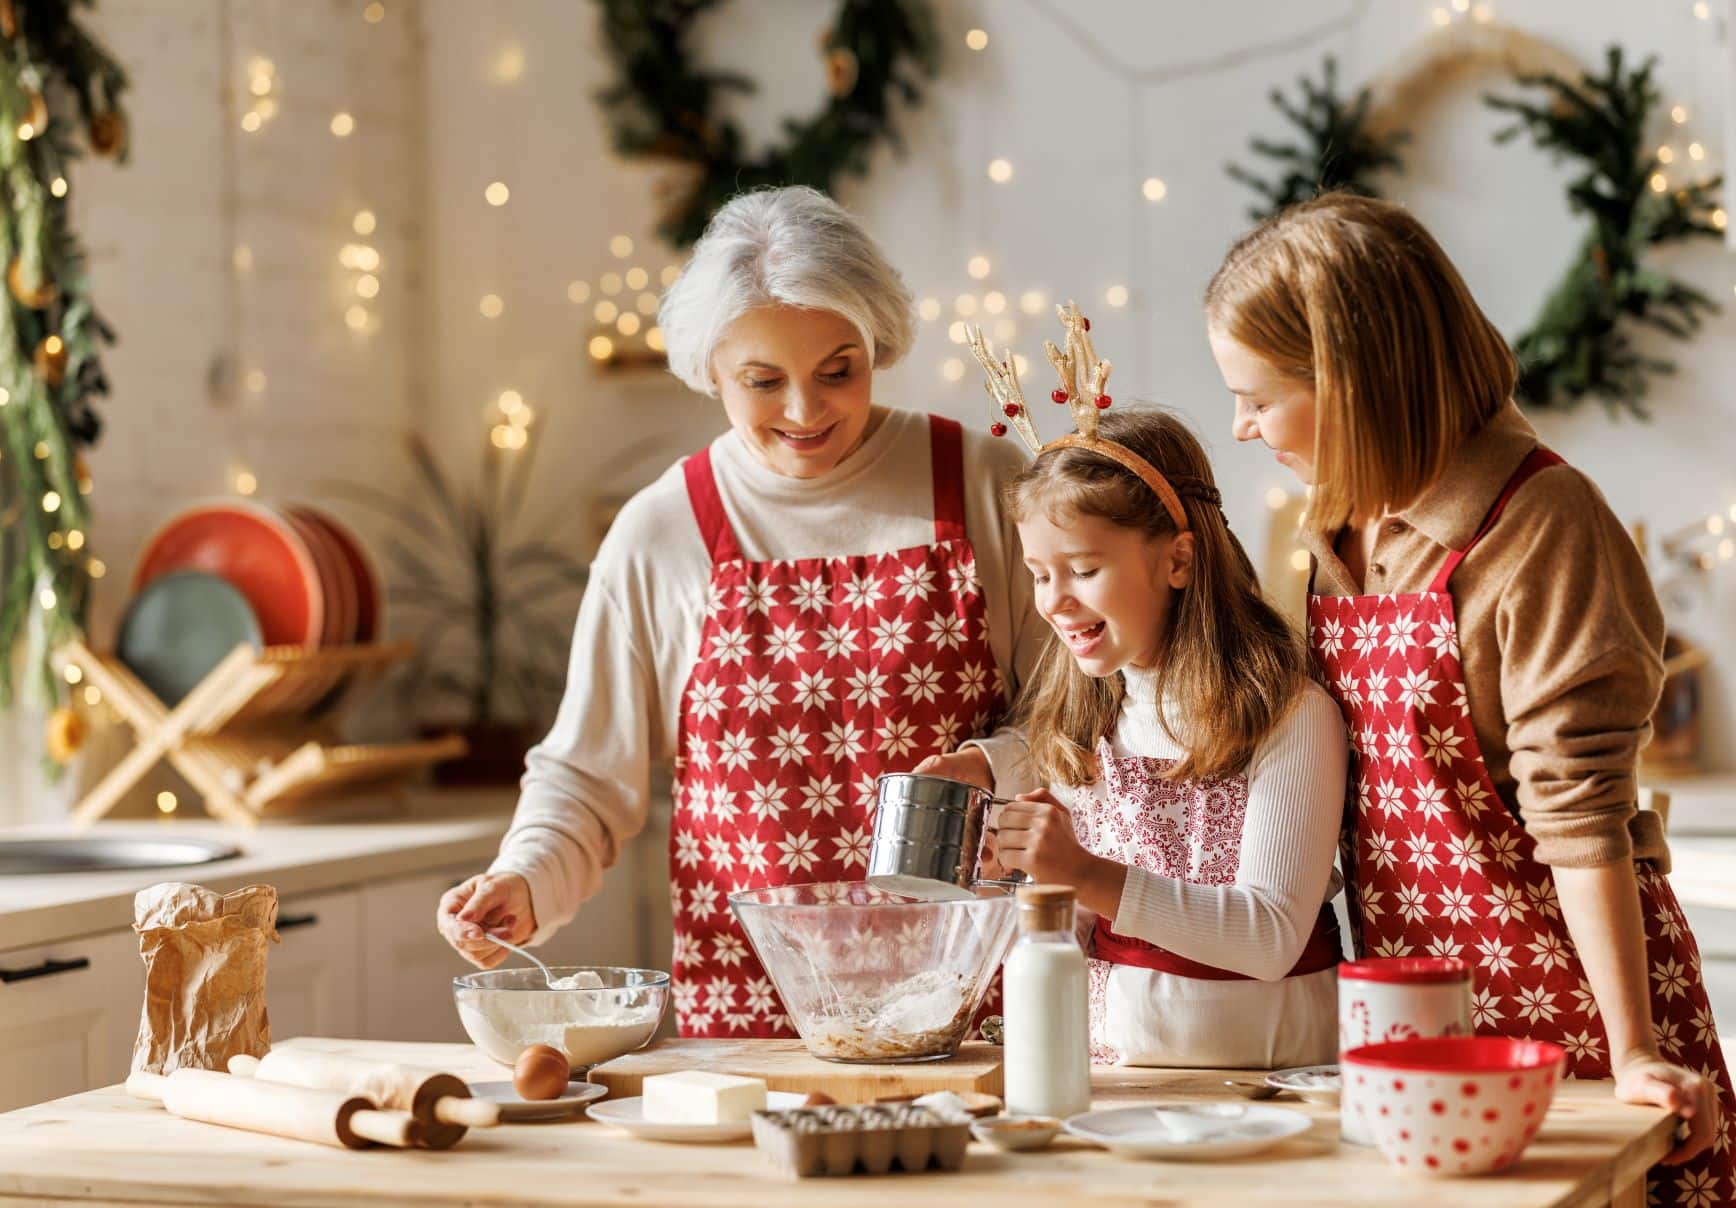 elderly woman, adult woman, and young girl baking together